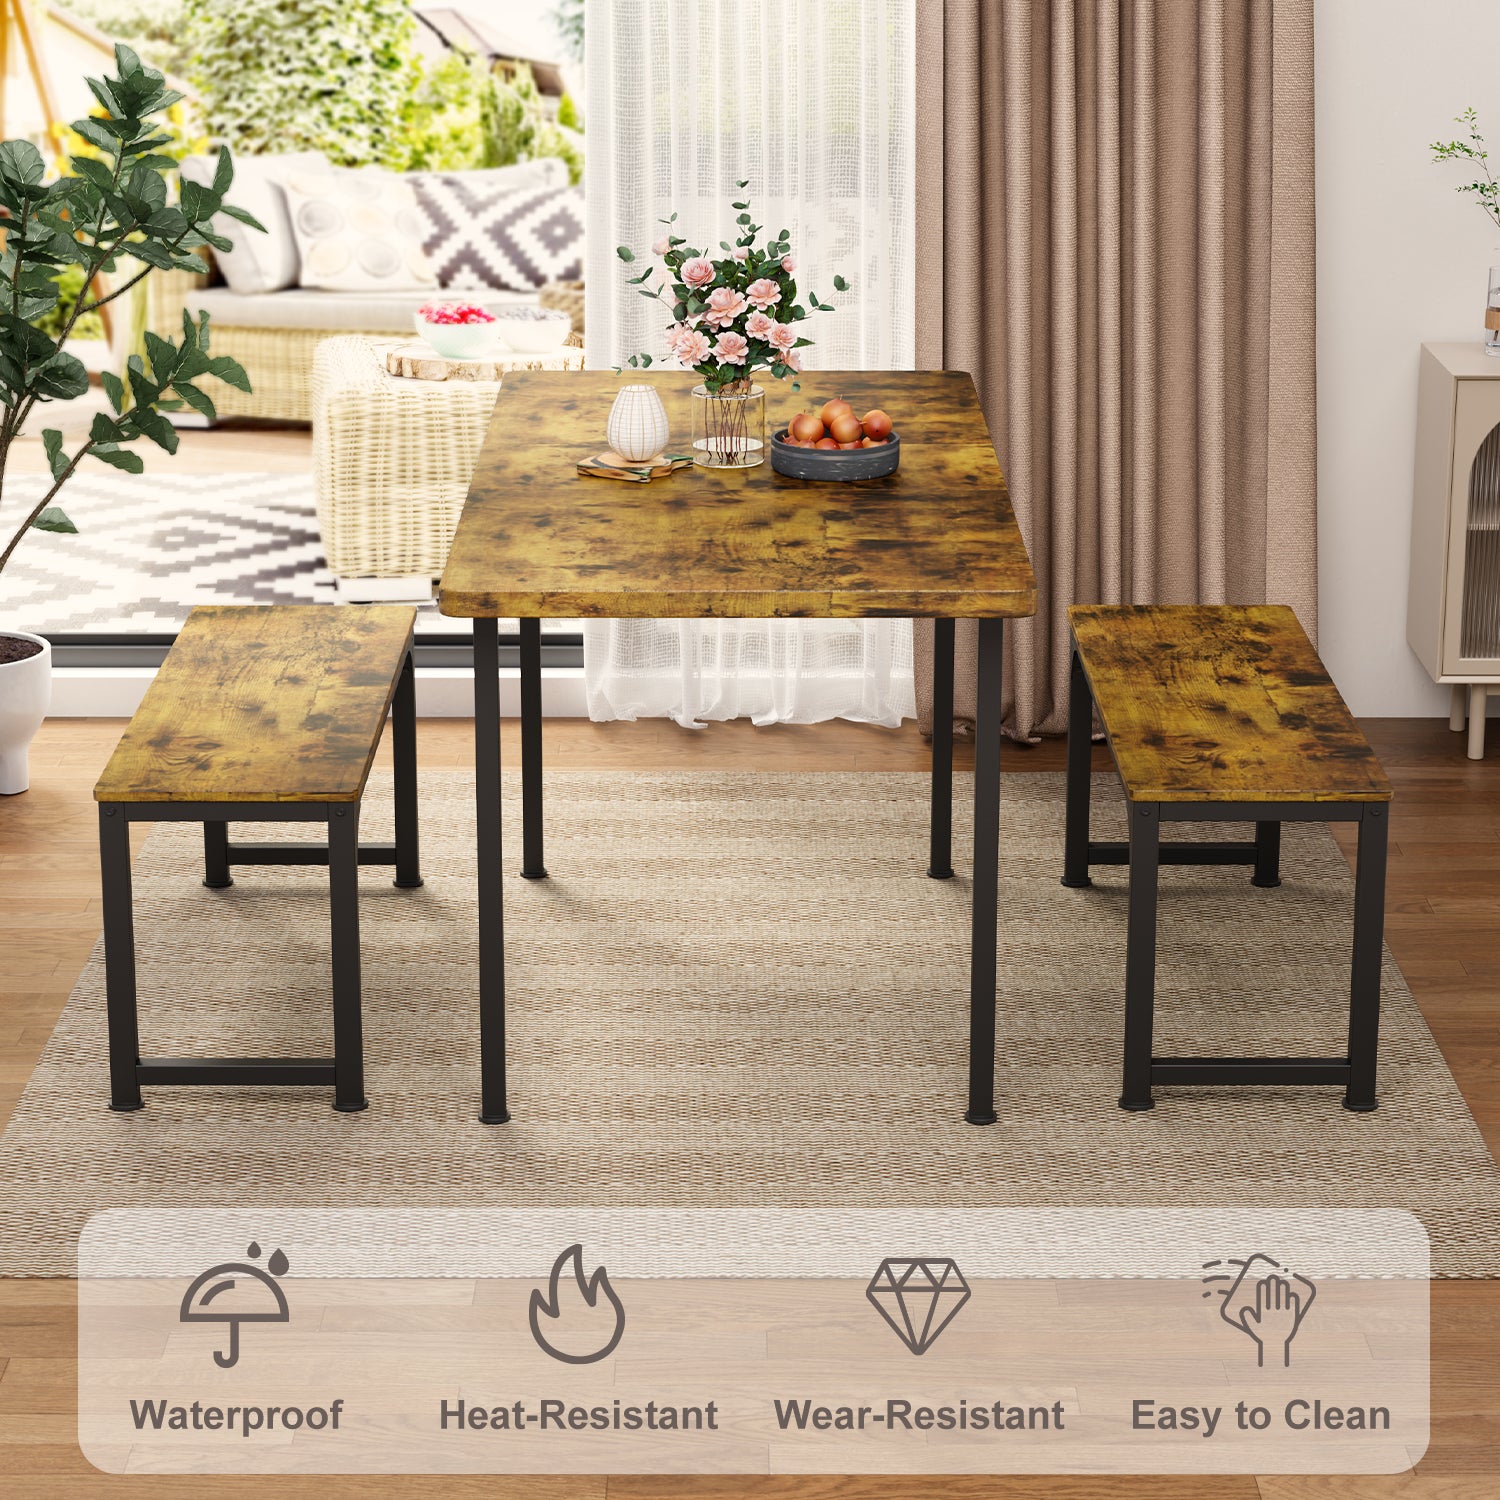 Gizoon TB73 55" Extendable Dining Table Set with 2 Benches for 4 to 6